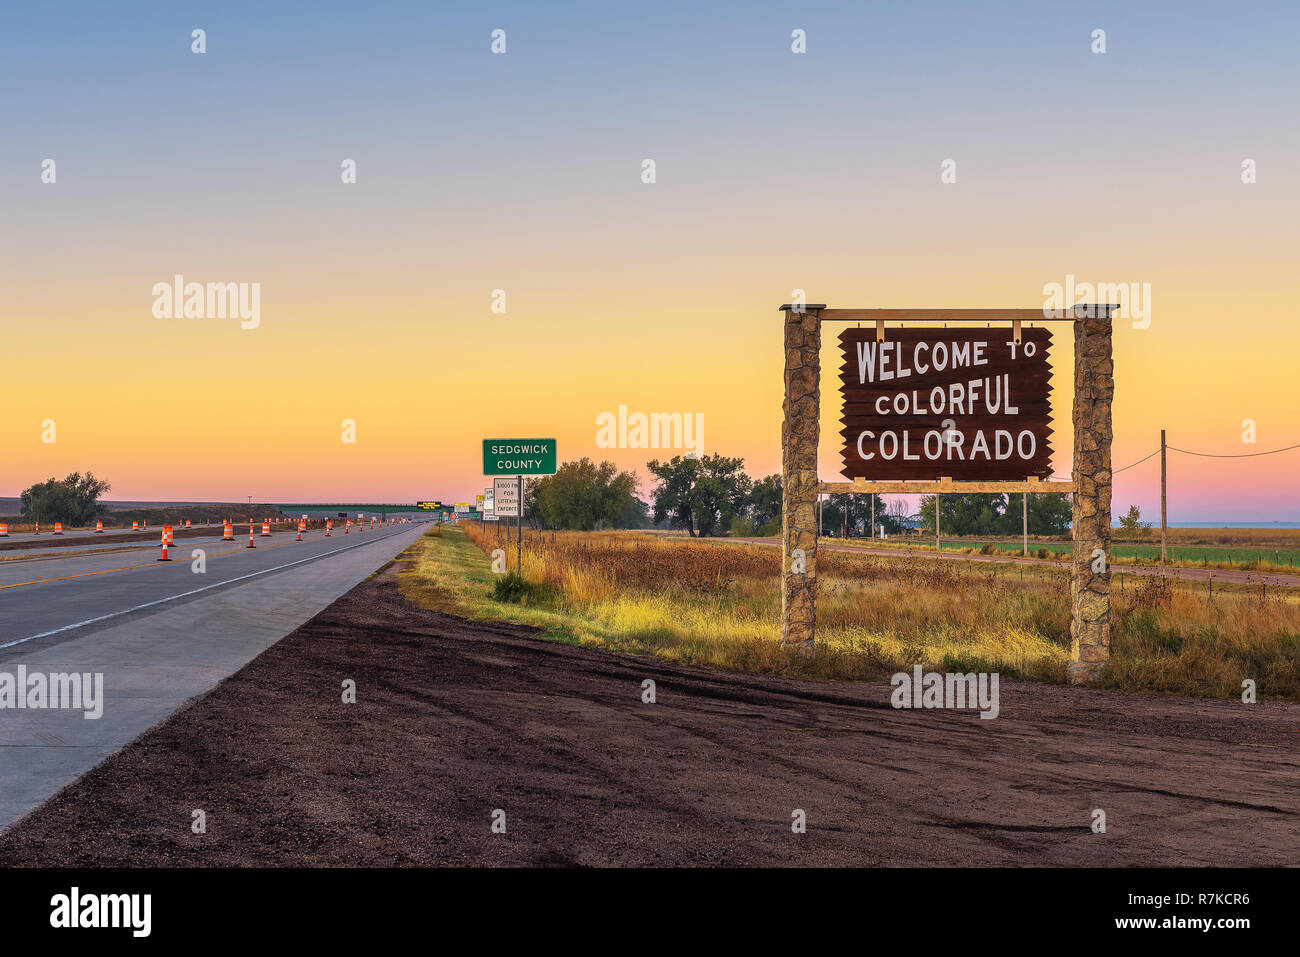 Welcome to colorful Colorado street sign along Interstate I-76 Stock Photo